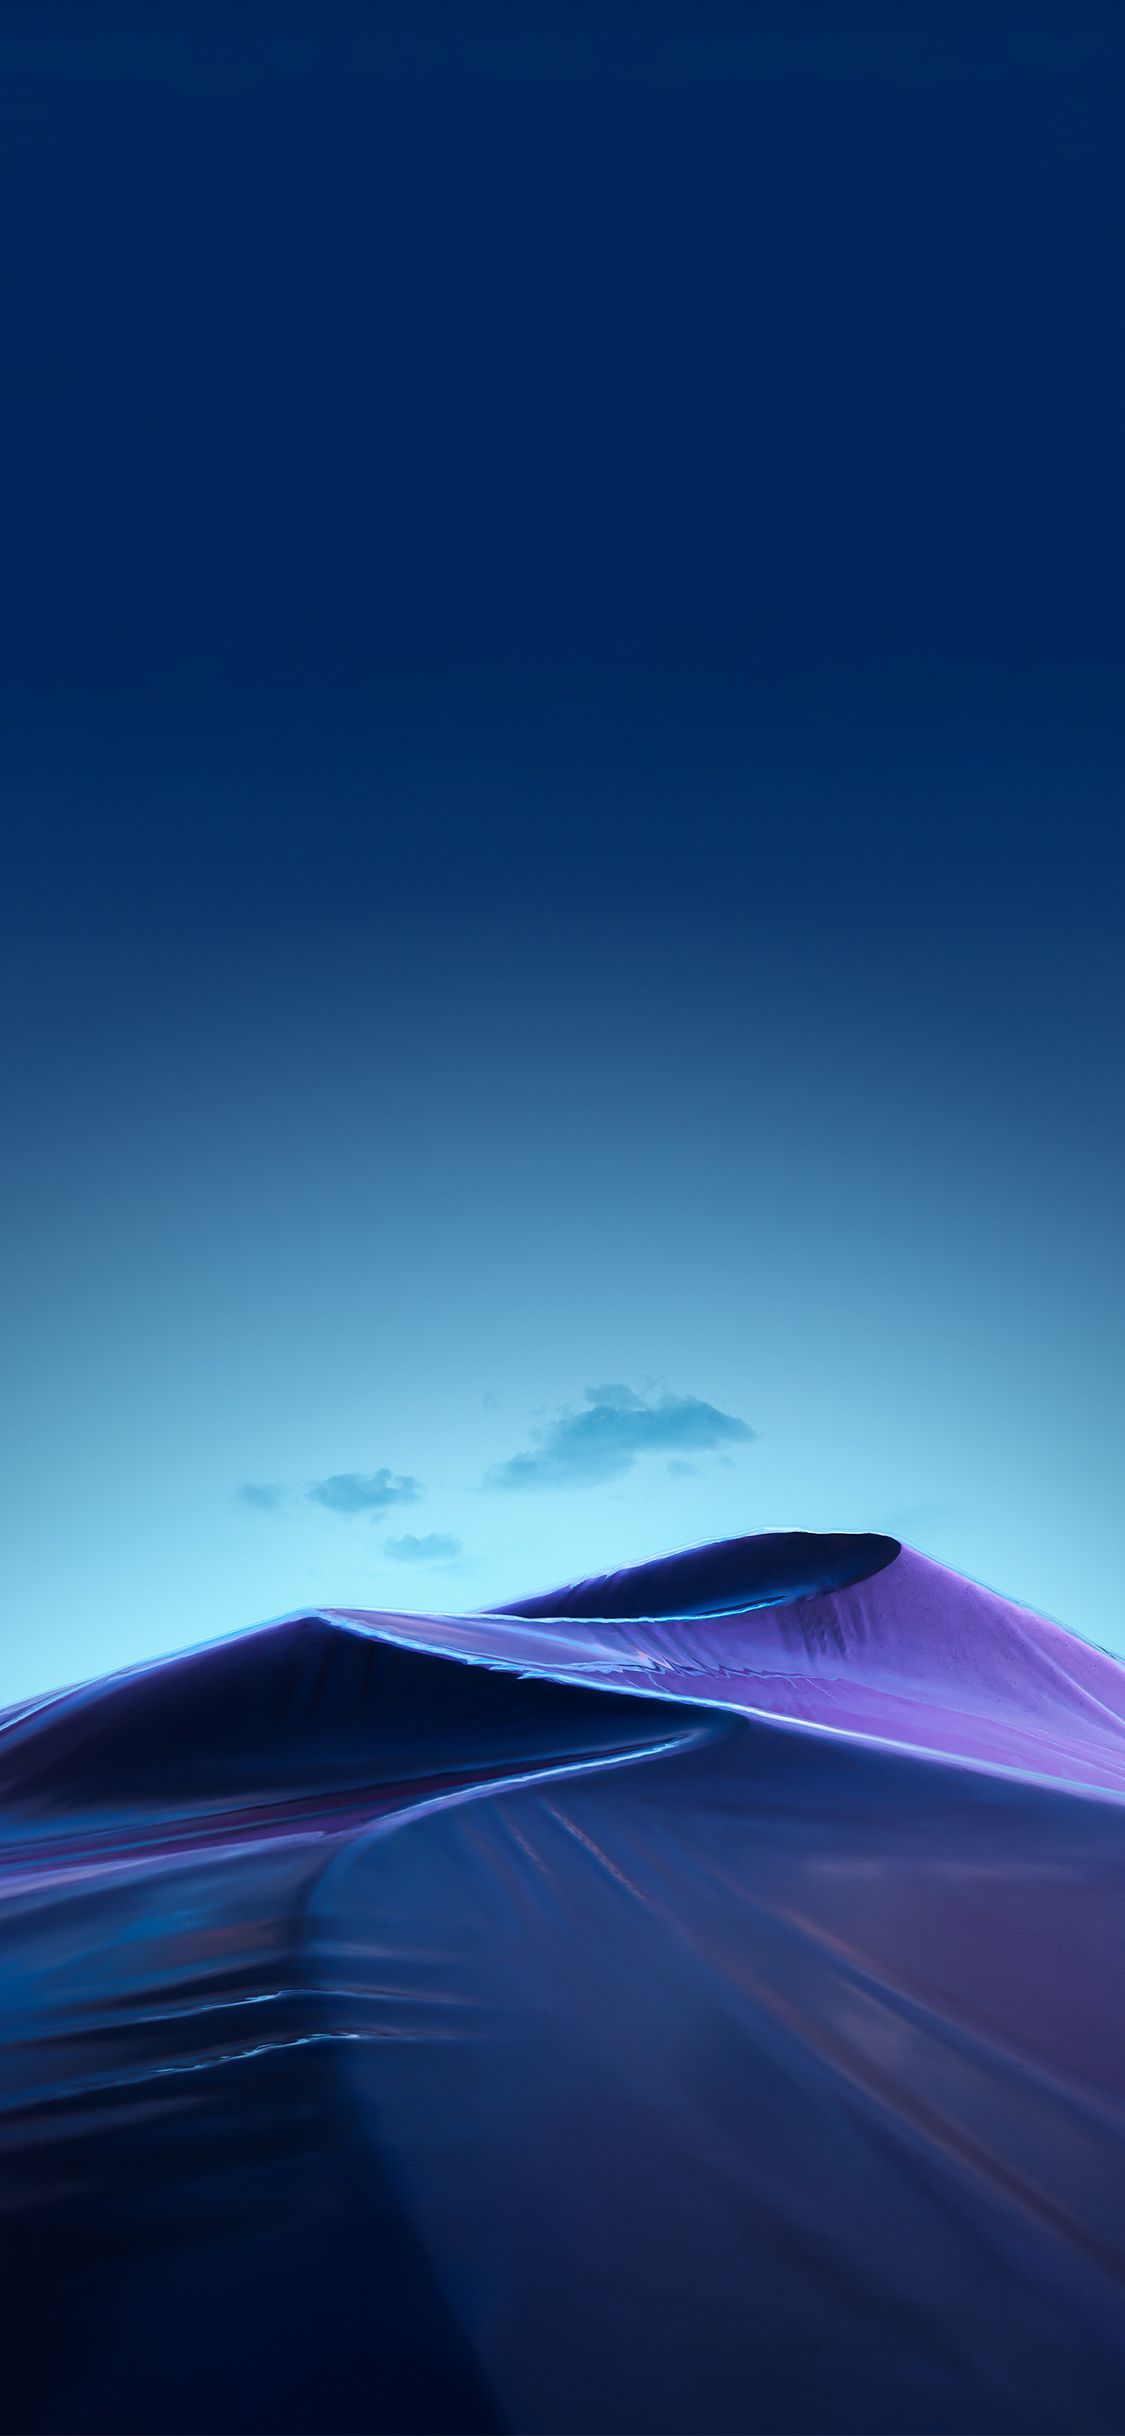 Download the Oppo Reno 5K wallpapers in high resolution - Mountain